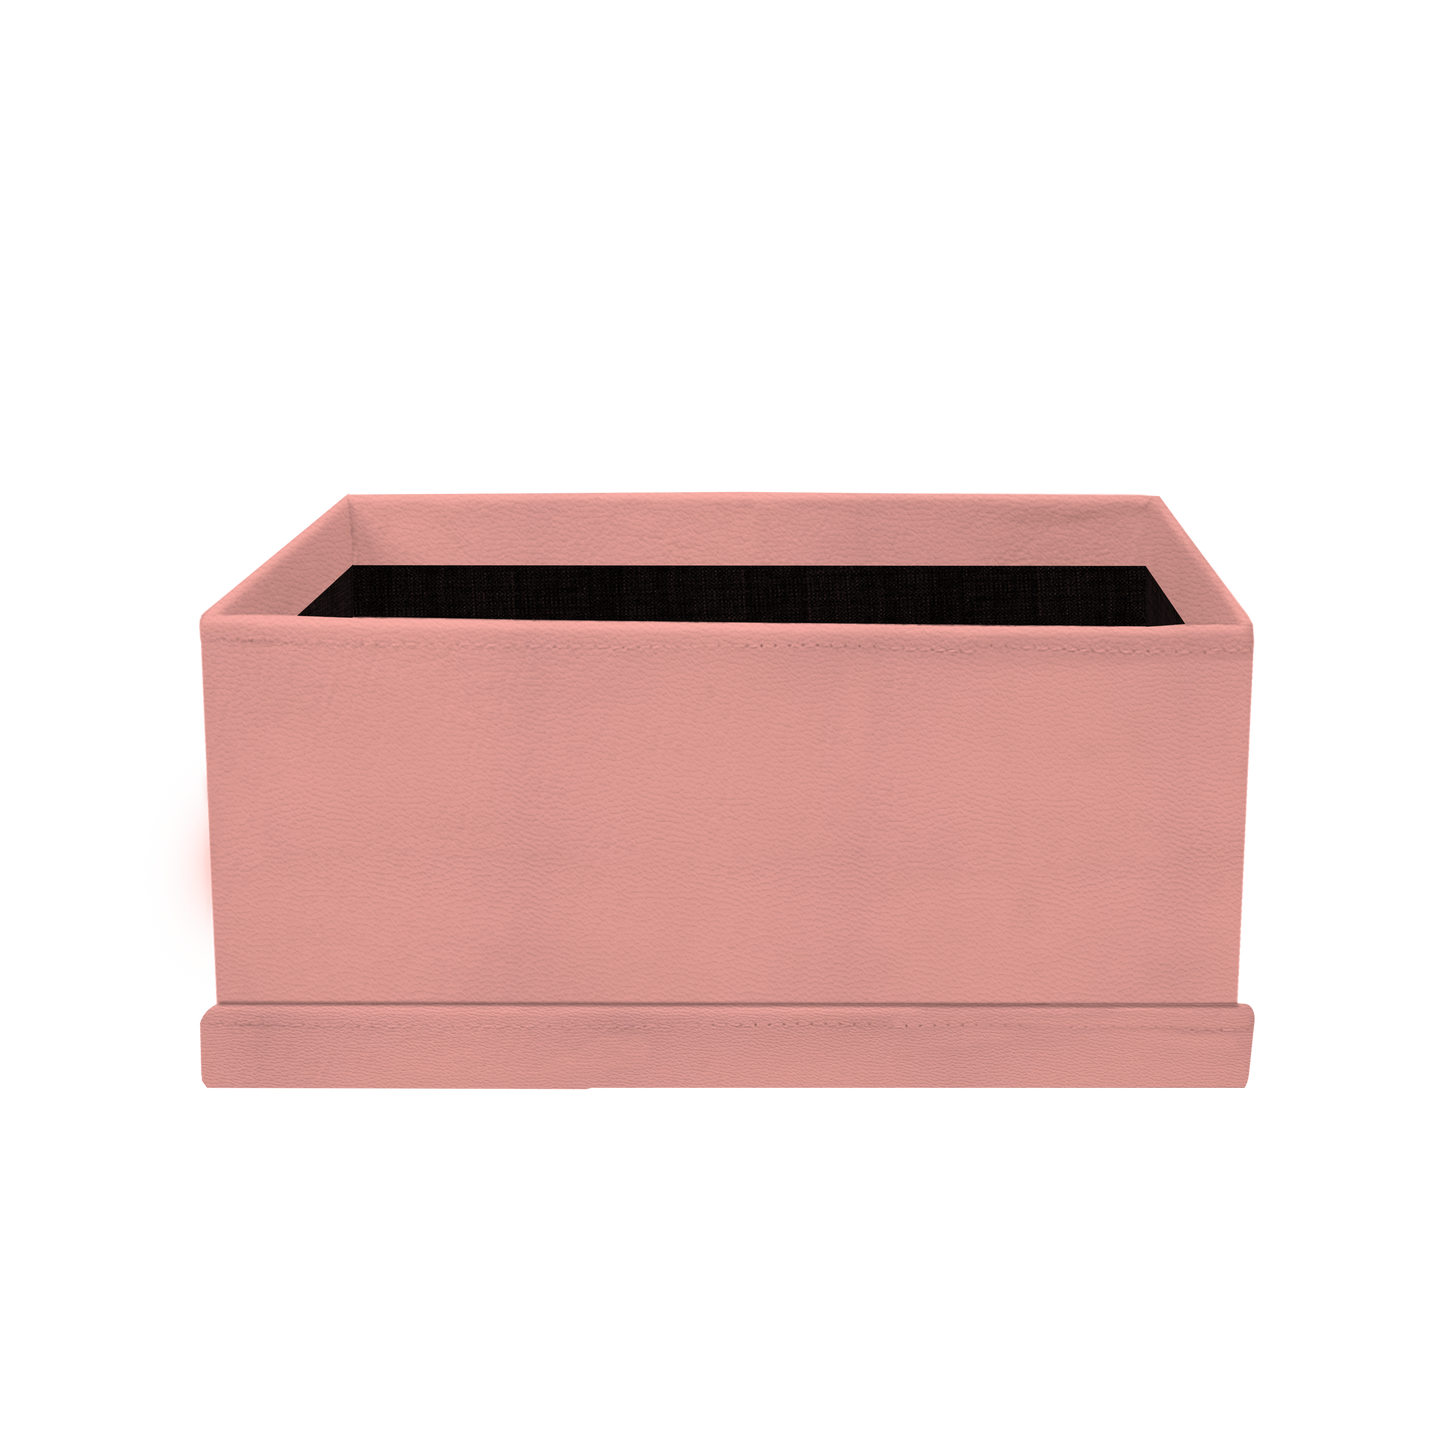 Kit 3 different sizes rectangular shape boxes 3 in 1 - PU Leather Pink